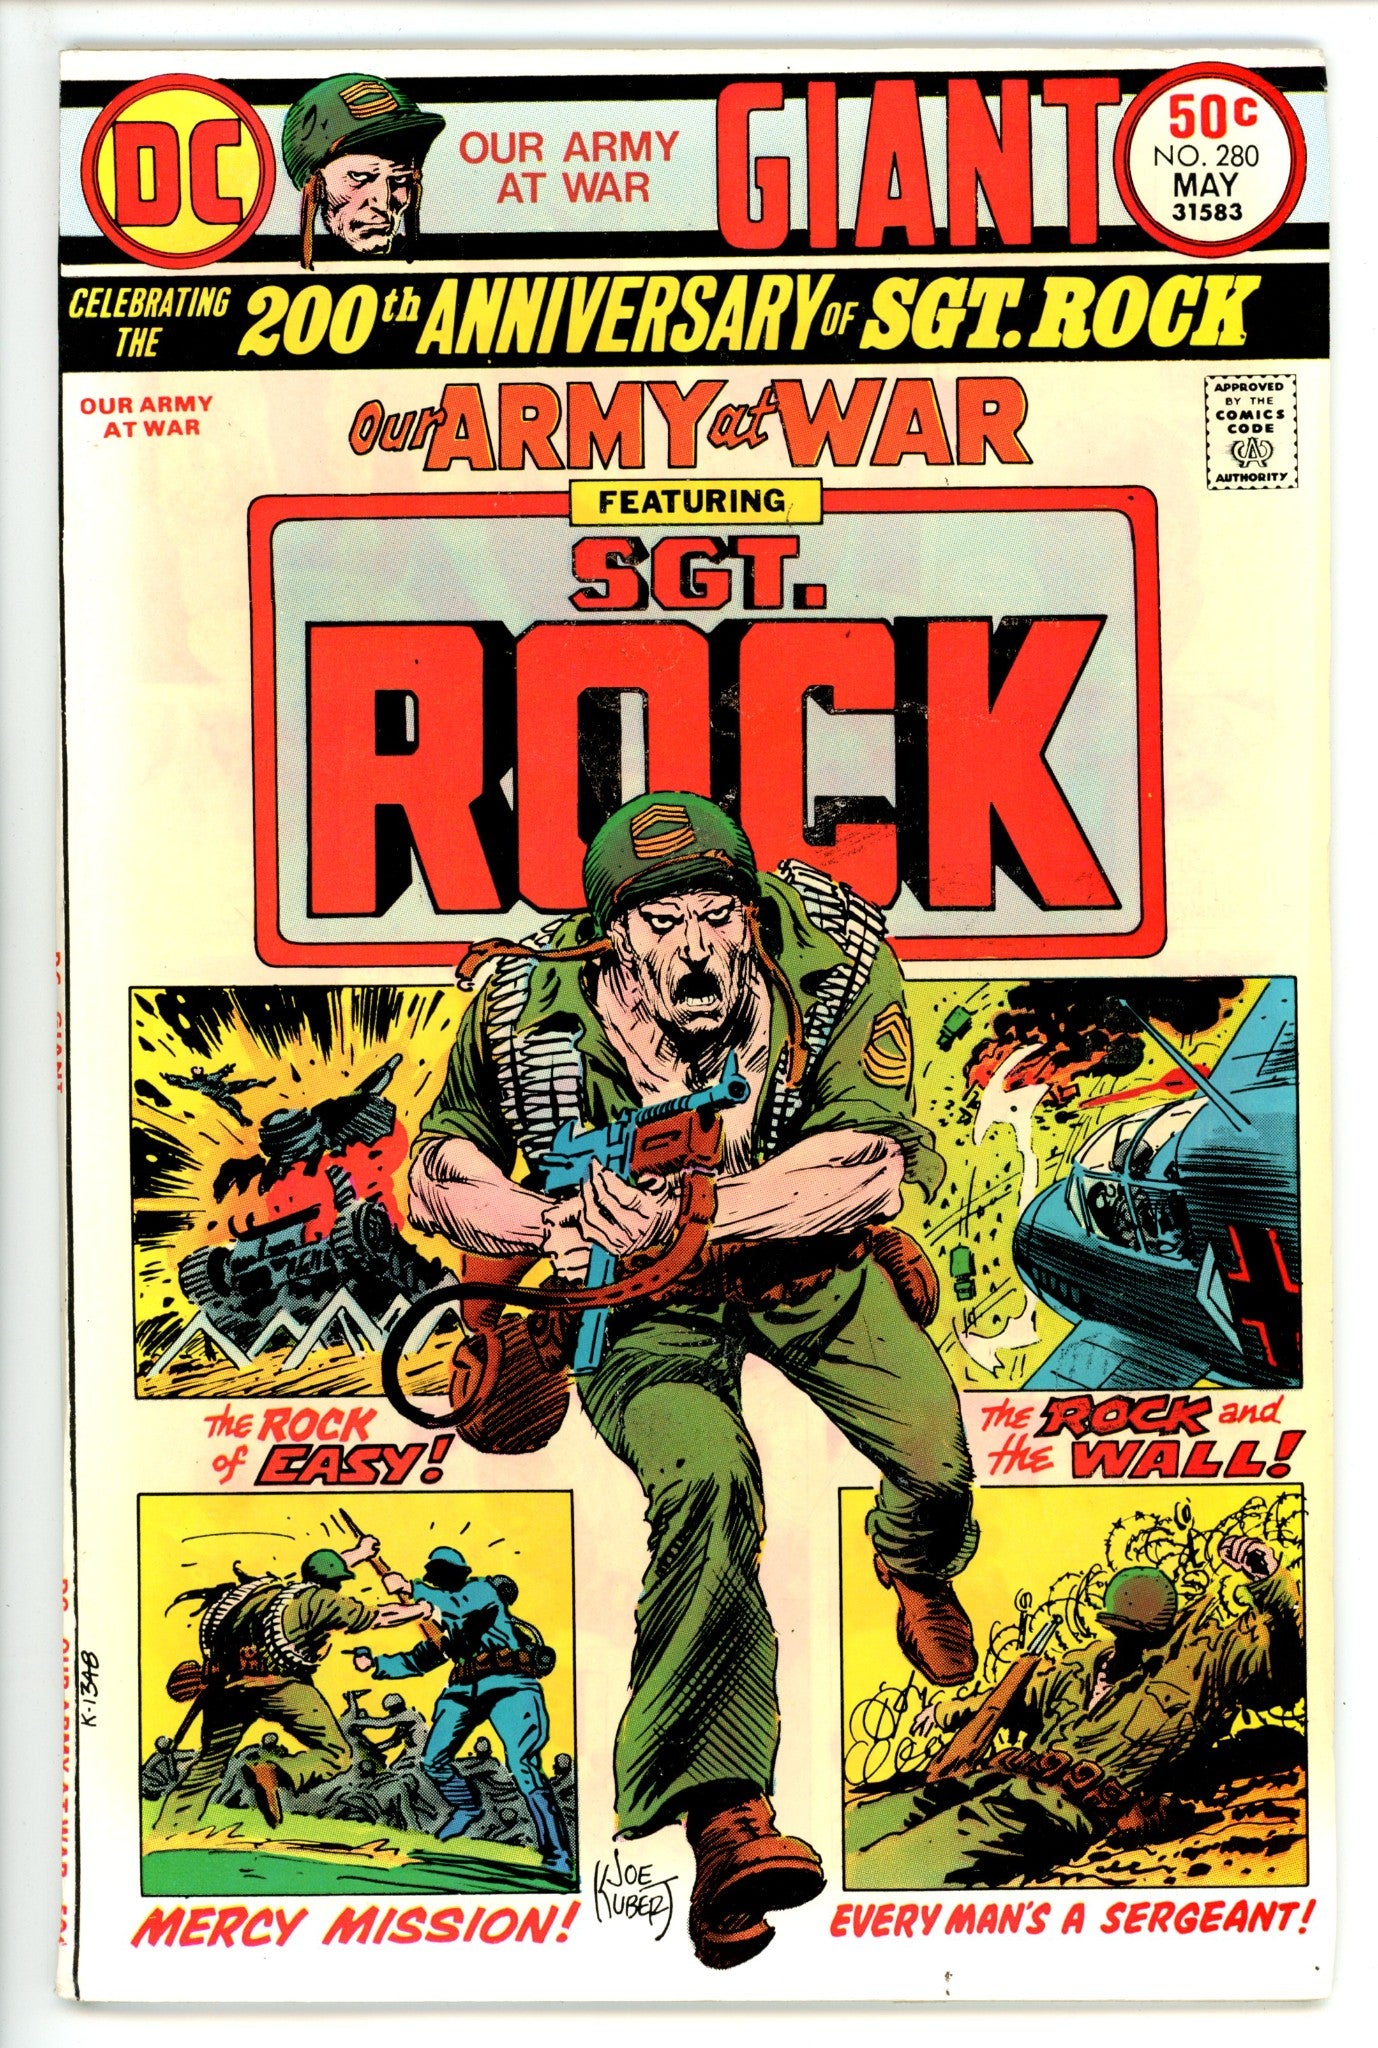 Our Army at War Vol 1 280 VF- (7.5) (1975) 